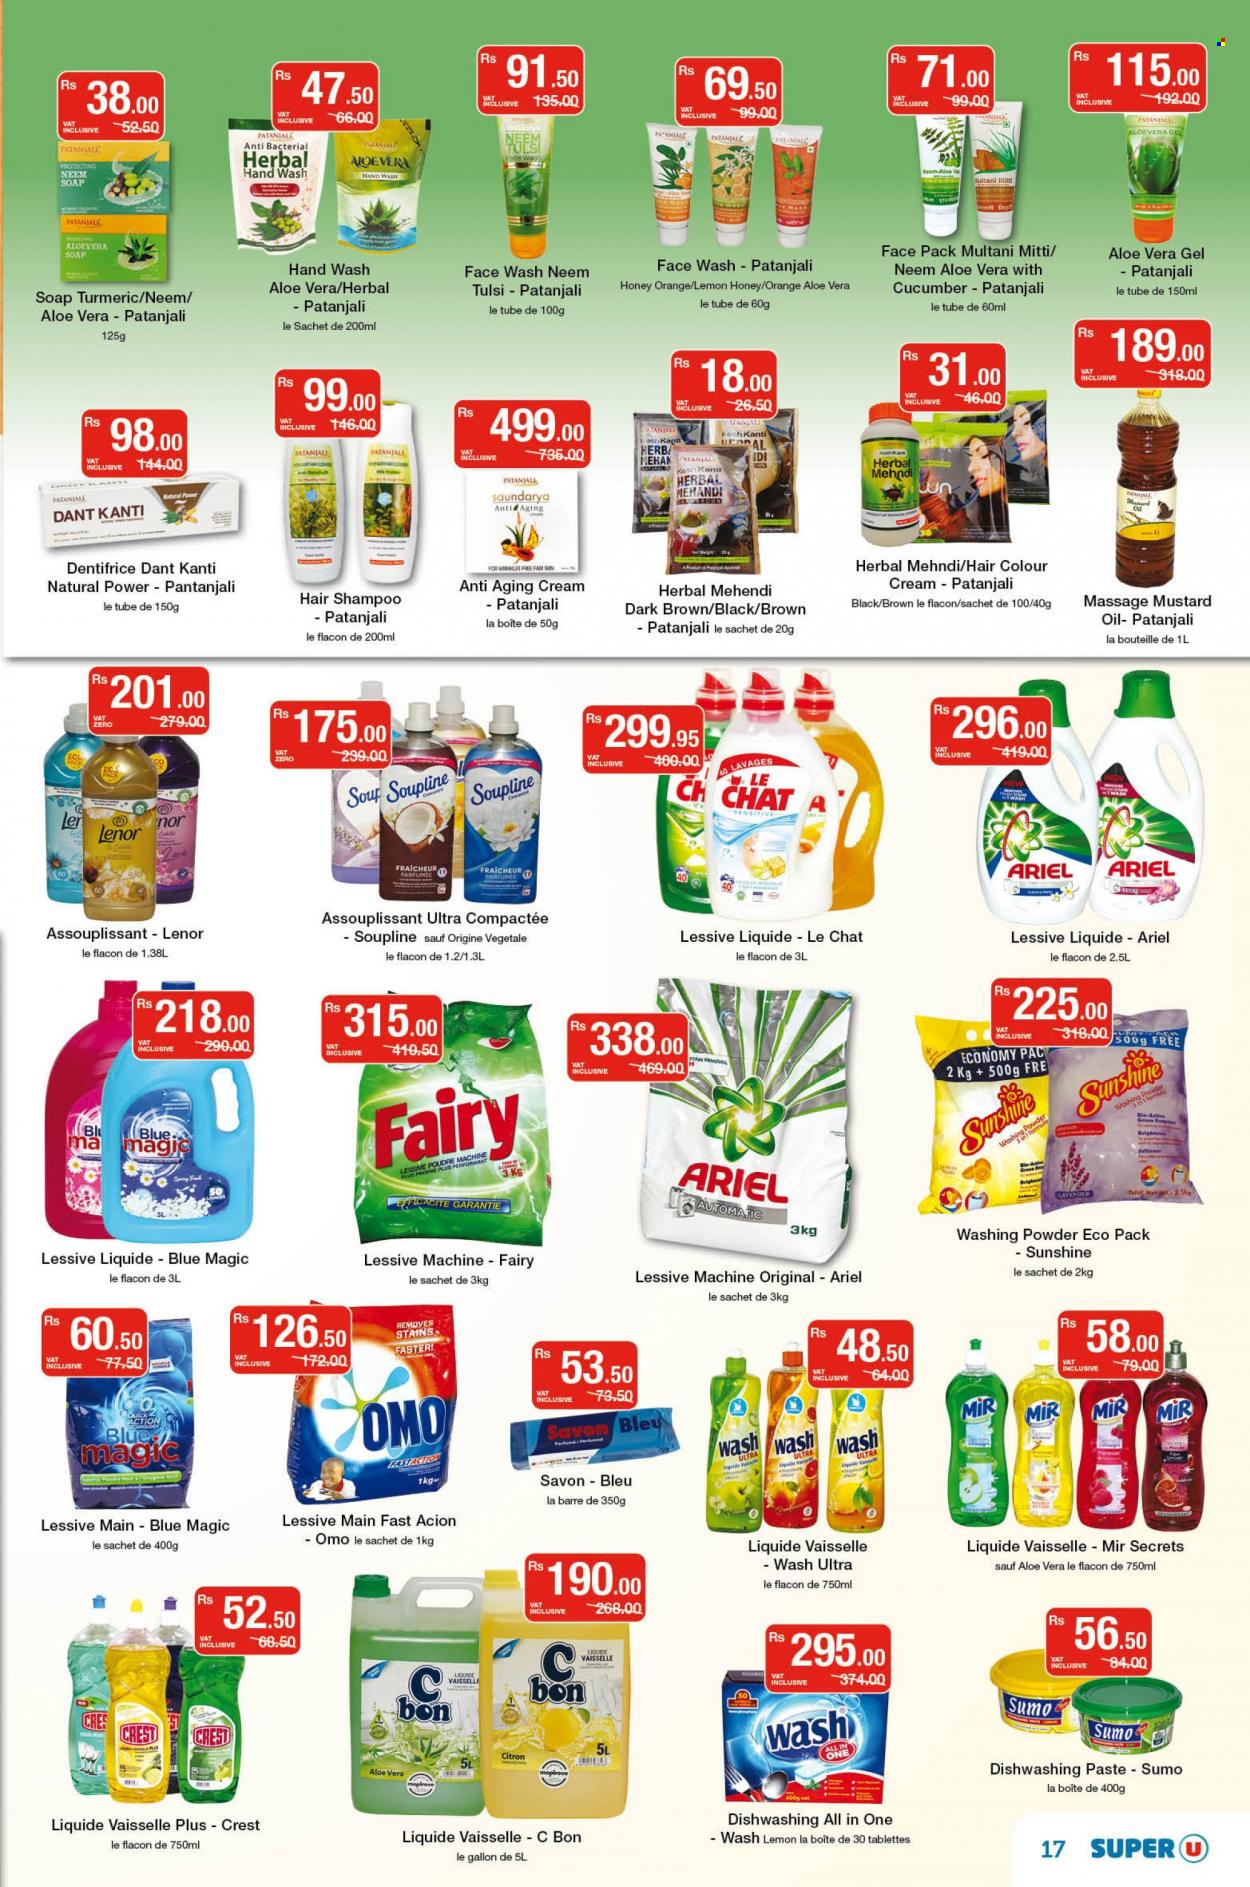 thumbnail - Super U Catalogue - 23.09.2022 - 6.10.2022 - Sales products - oranges, Sunshine, turmeric, herbs, mustard oil, oil, honey, Fairy, fabric softener, Ariel, Omo, laundry powder, Lenor, hand wash, face gel, soap, Crest, face wash, hair color, shampoo. Page 17.